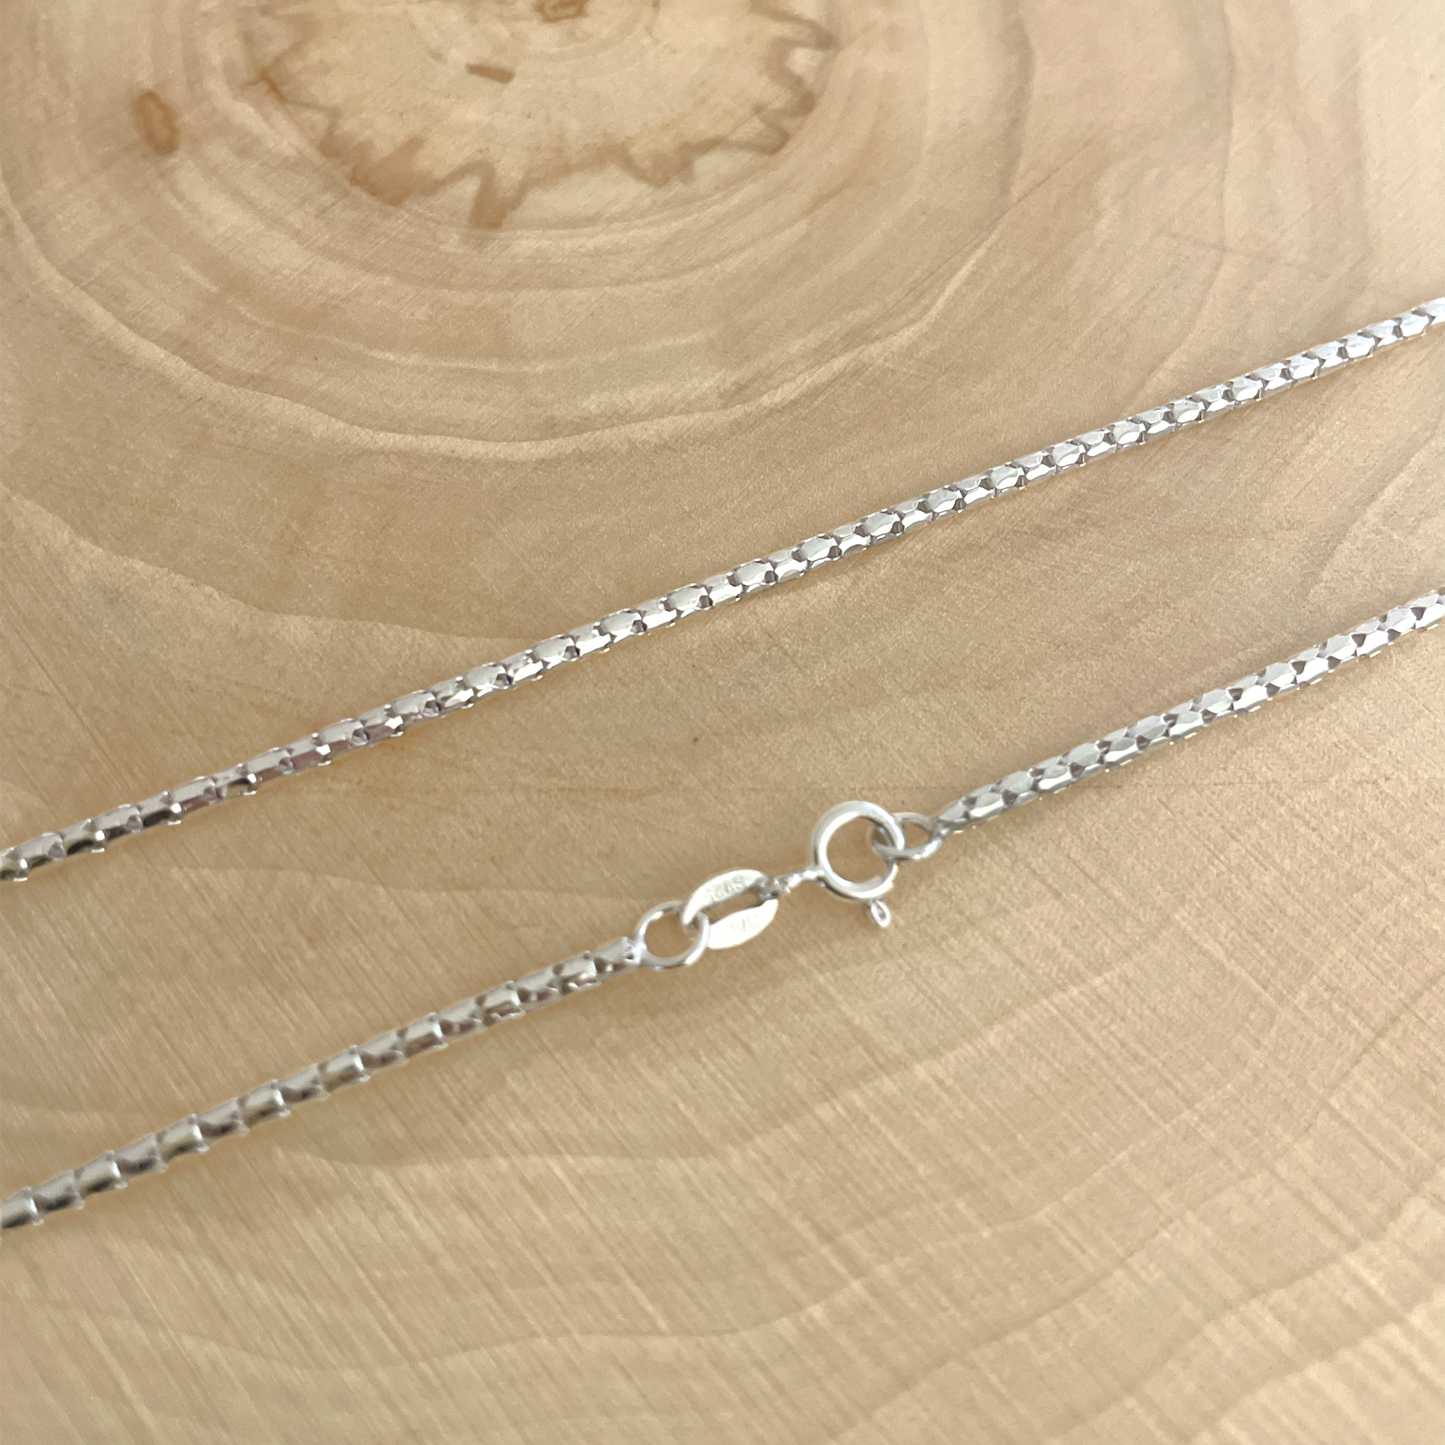 Sterling Silver Chain C 20"